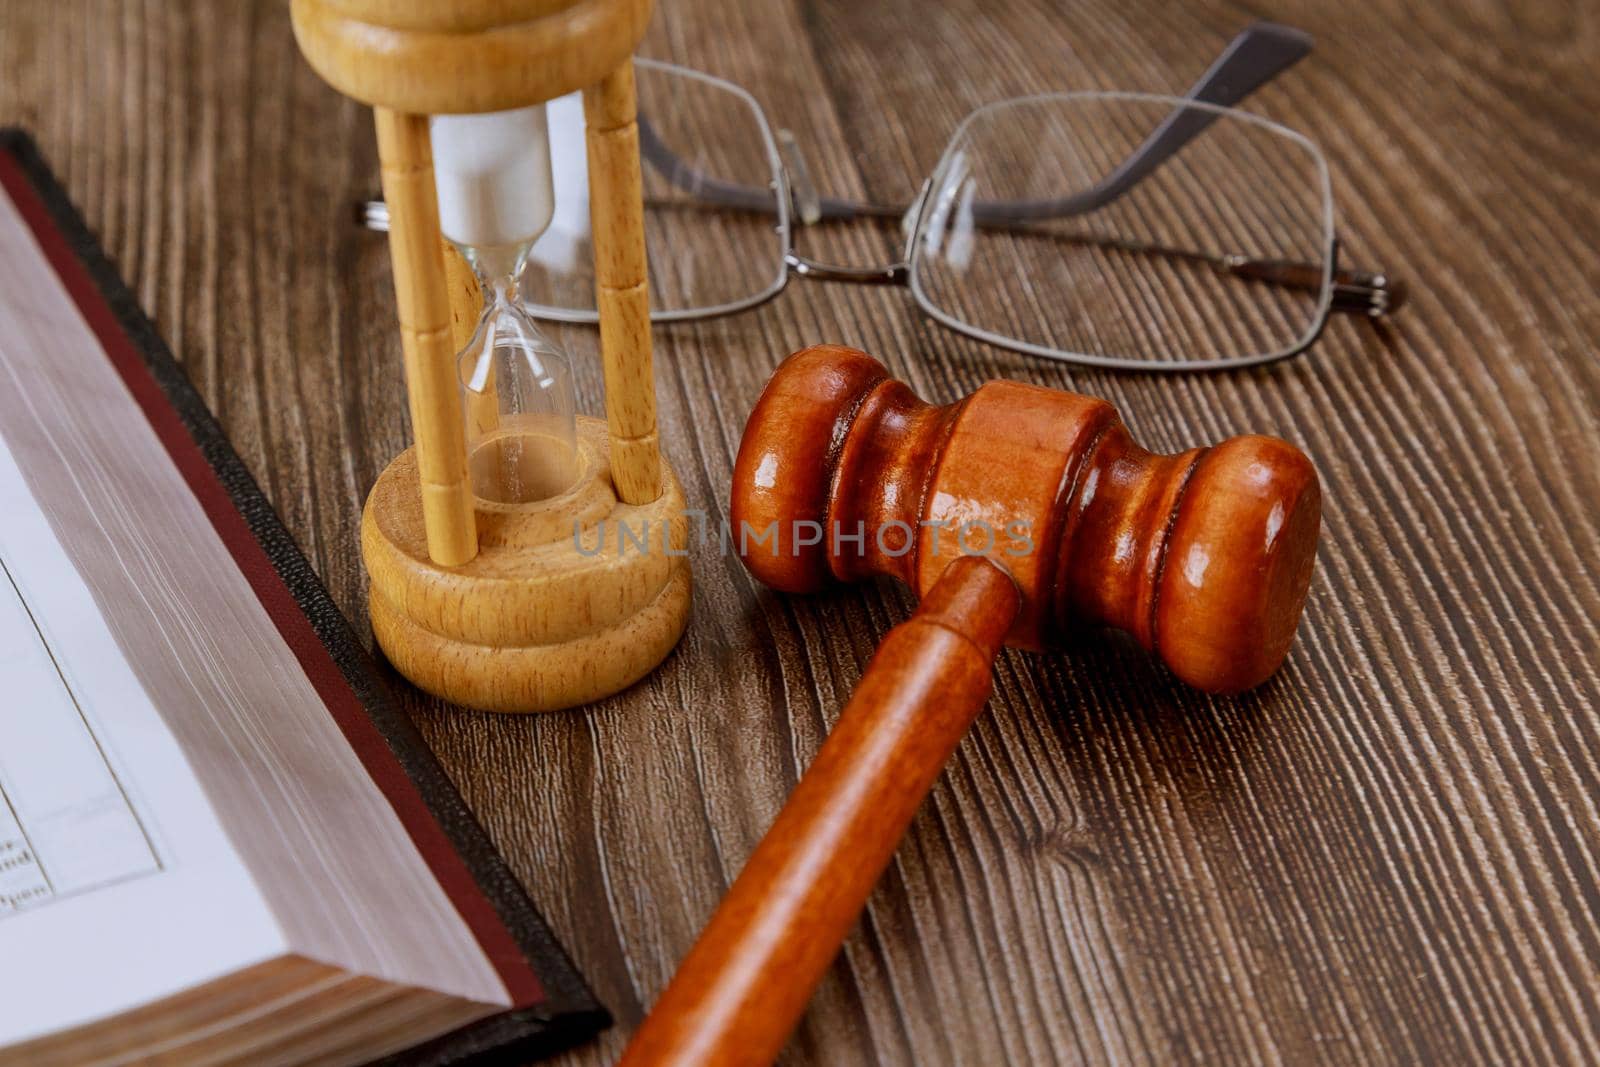 Open Holy Bible Book with hourglass judge's gavel on wooden background